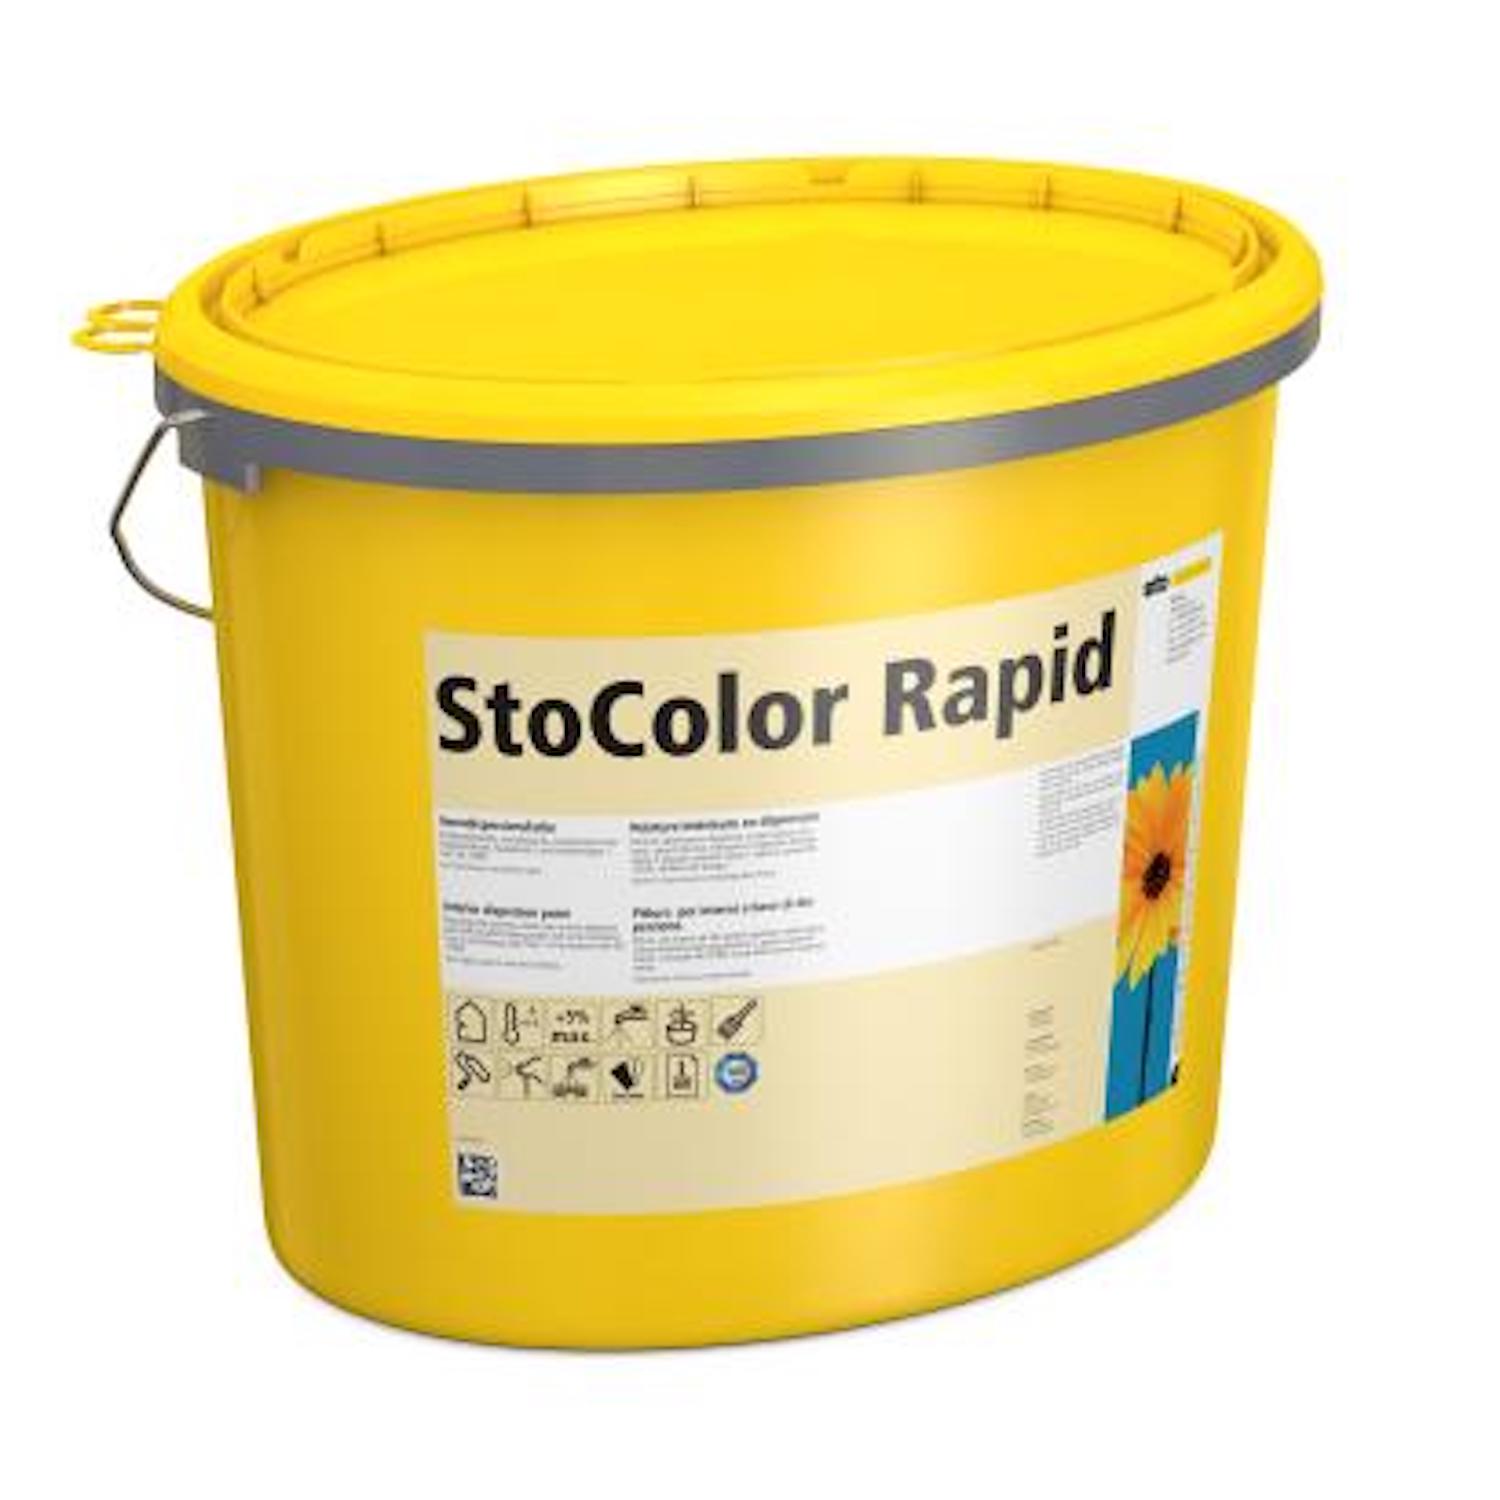 StoColor Rapid